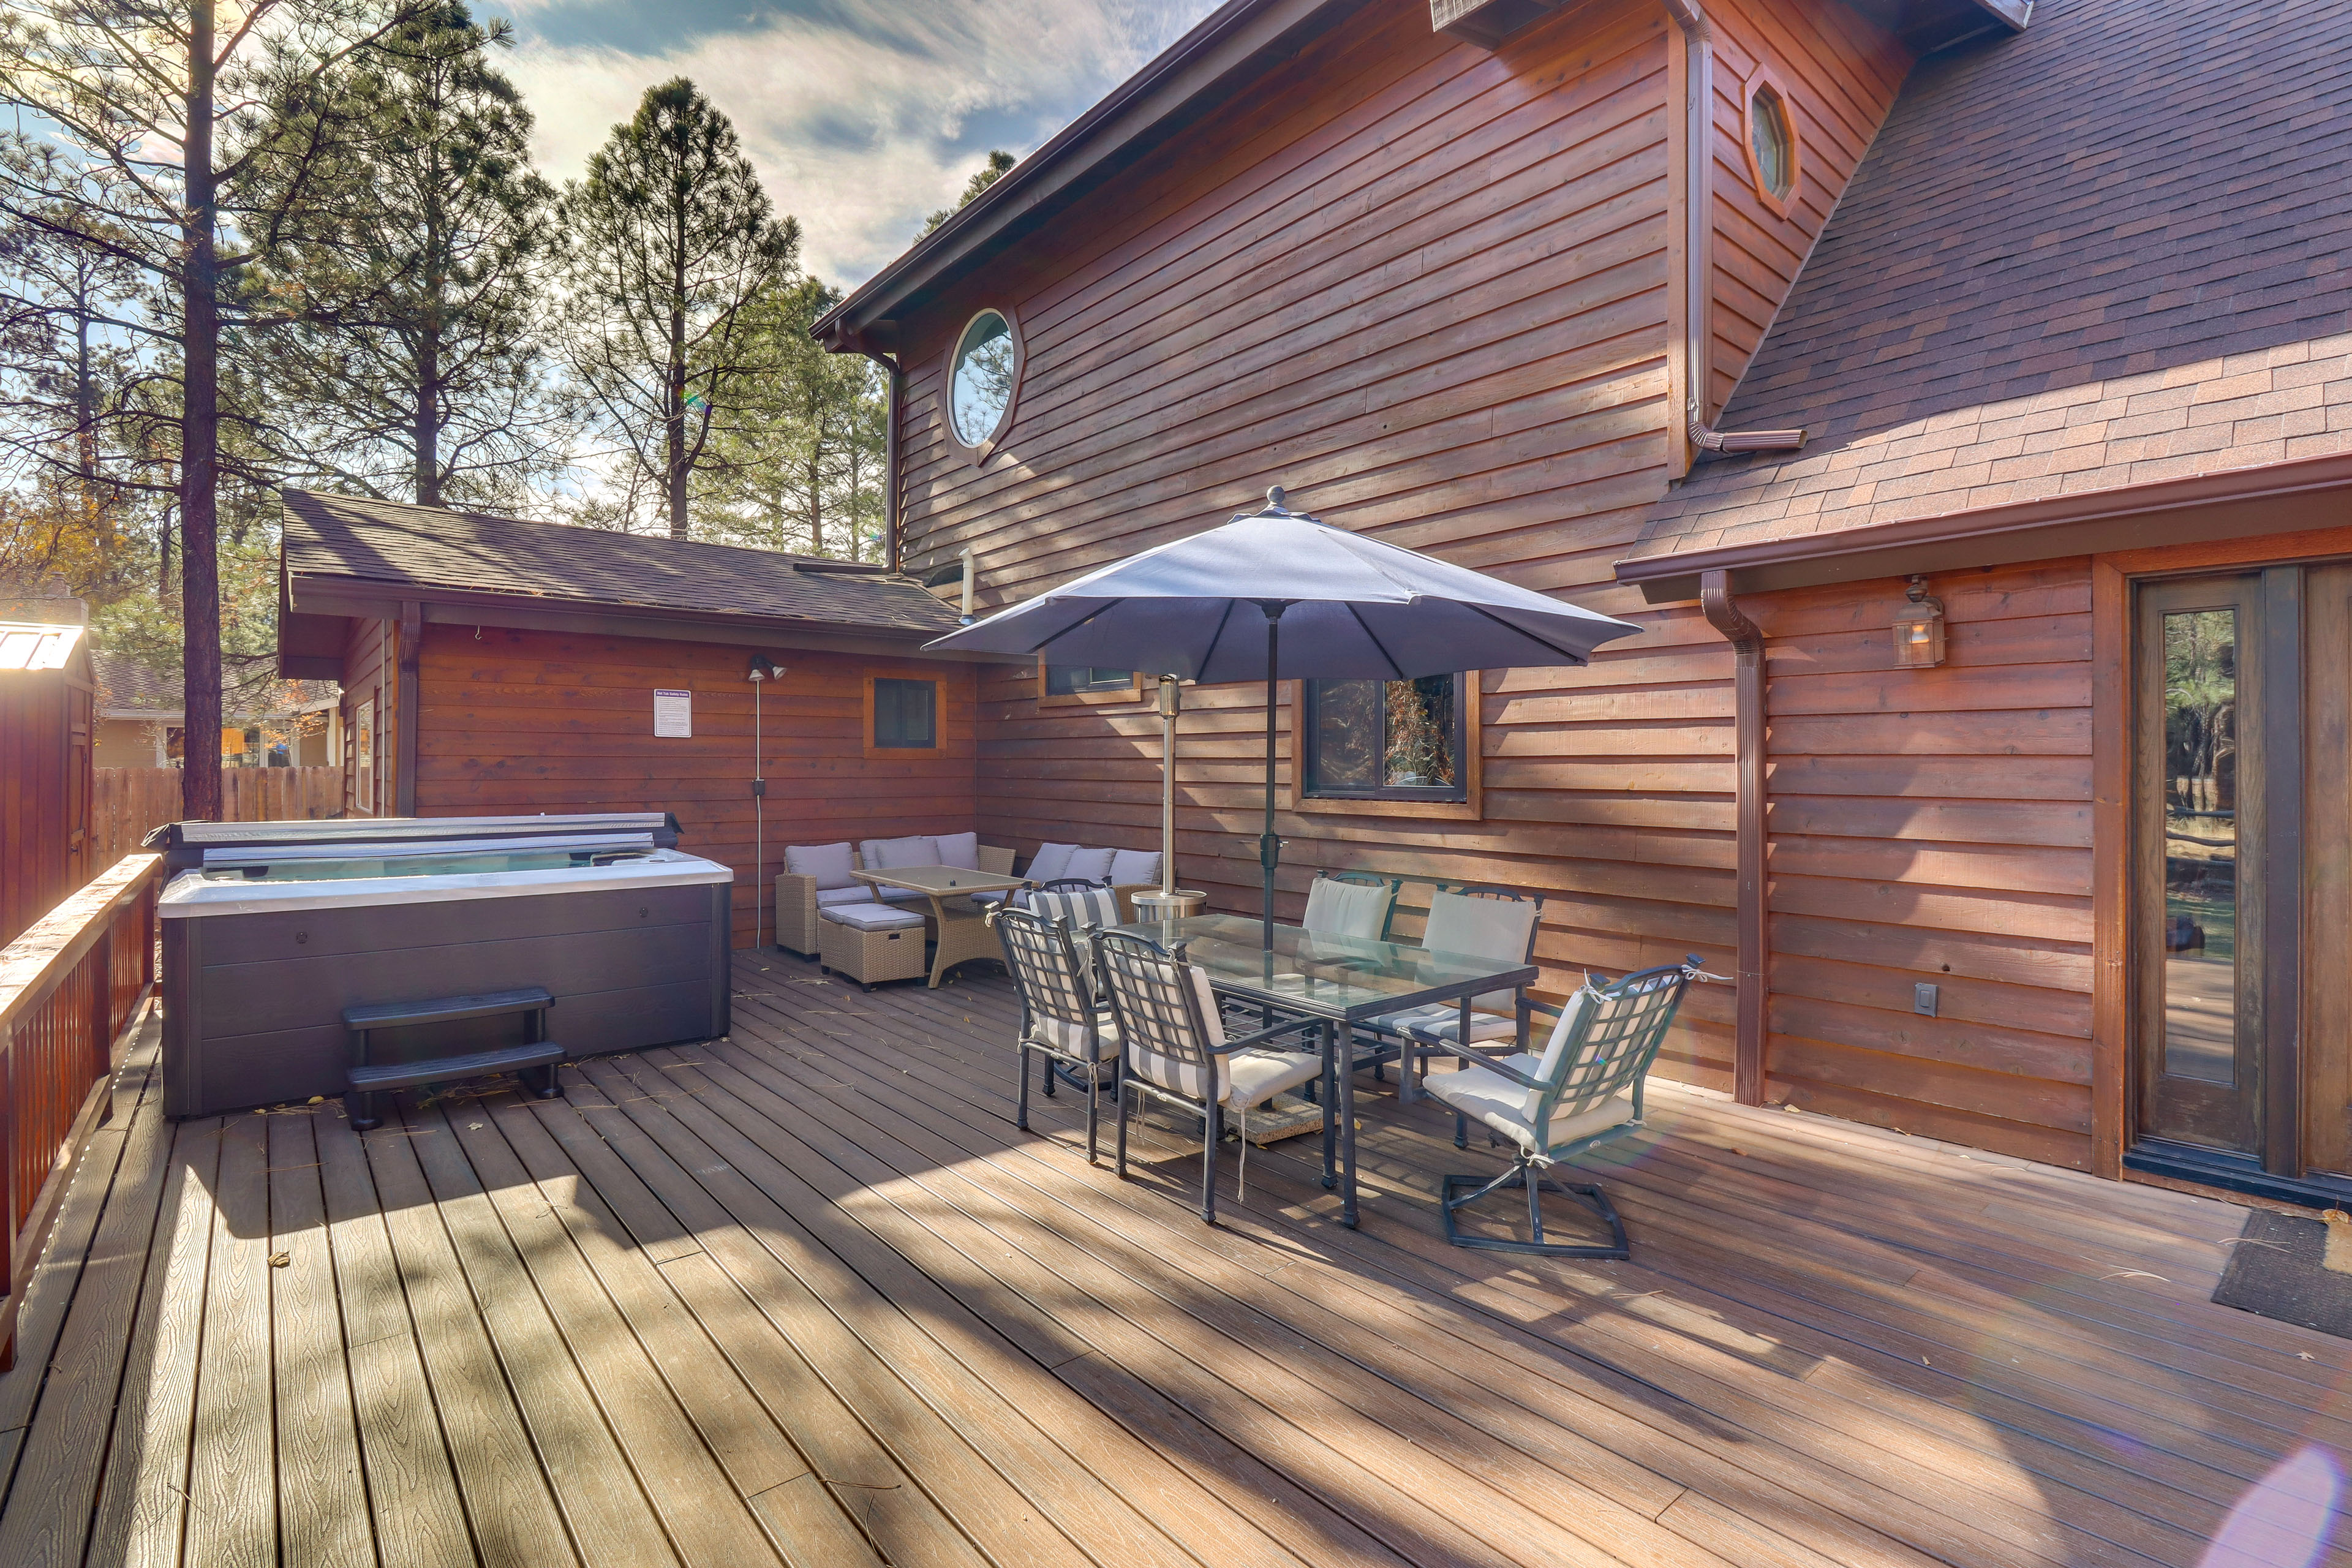 Property Image 2 - Pinetop Cabin: Hot Tub, Deck, Grill, & Game Room!